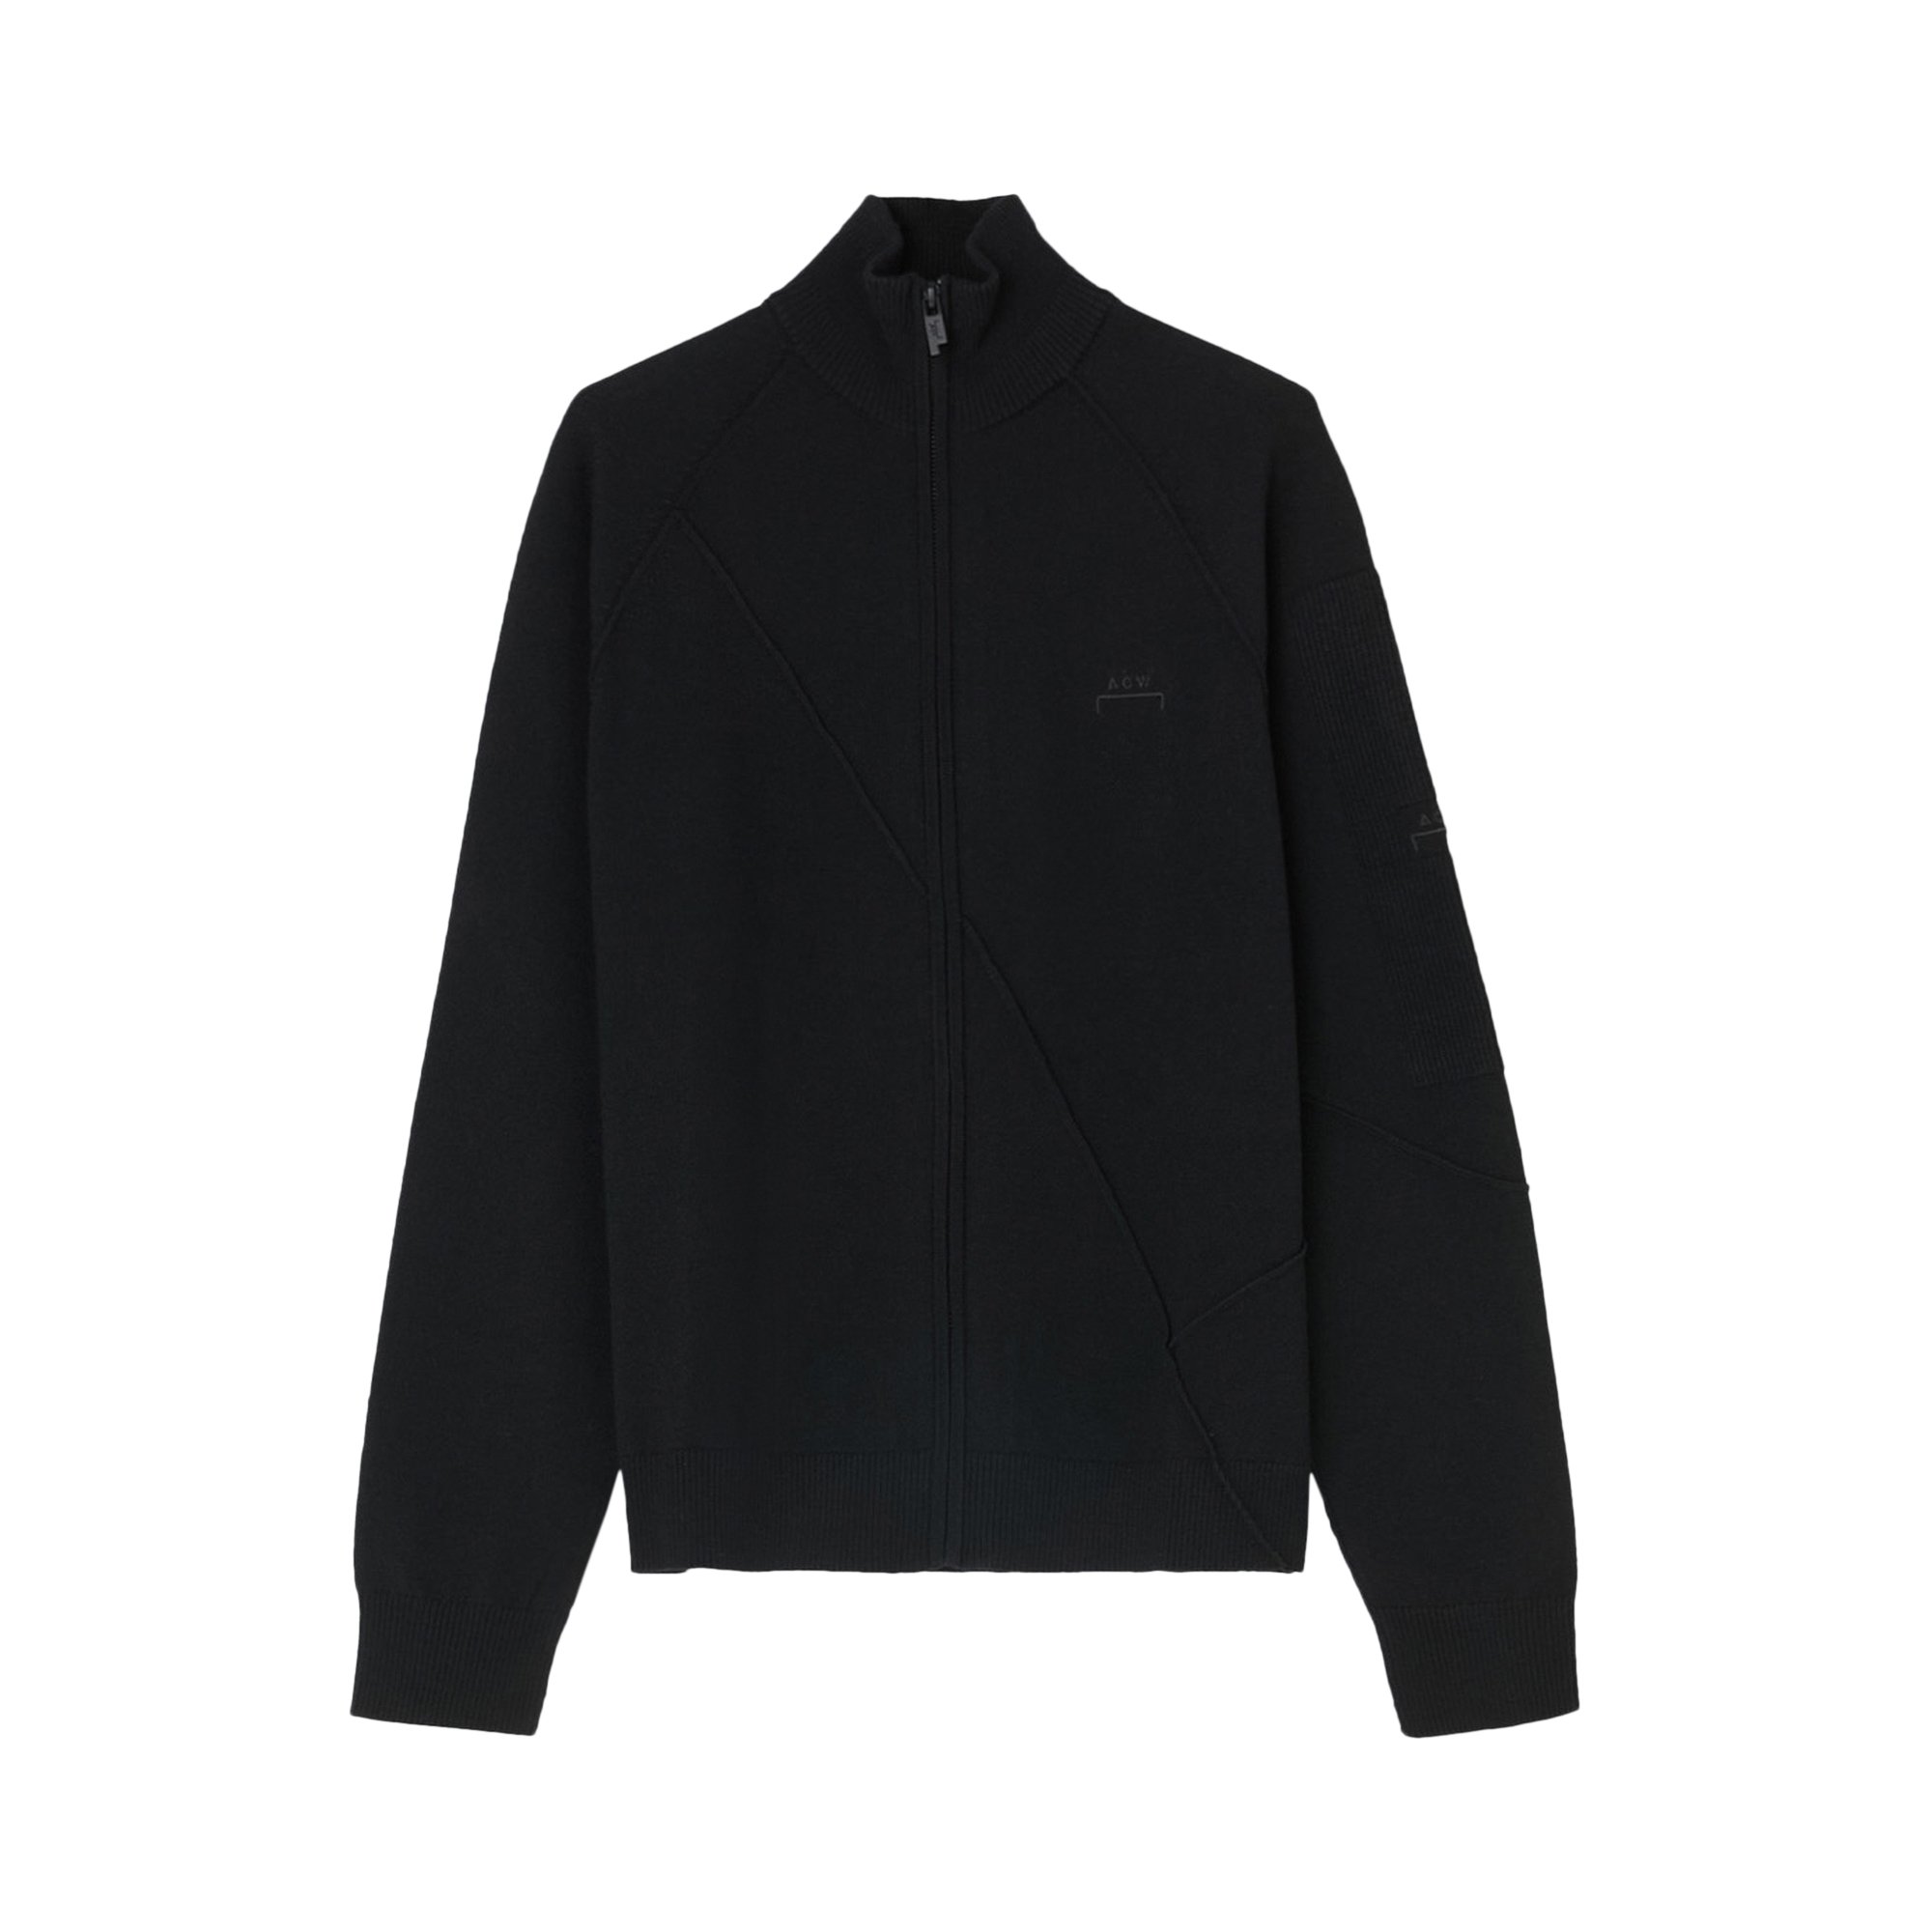 A-Cold-Wall* Merino Zip Up Knit Sweater 'Black'